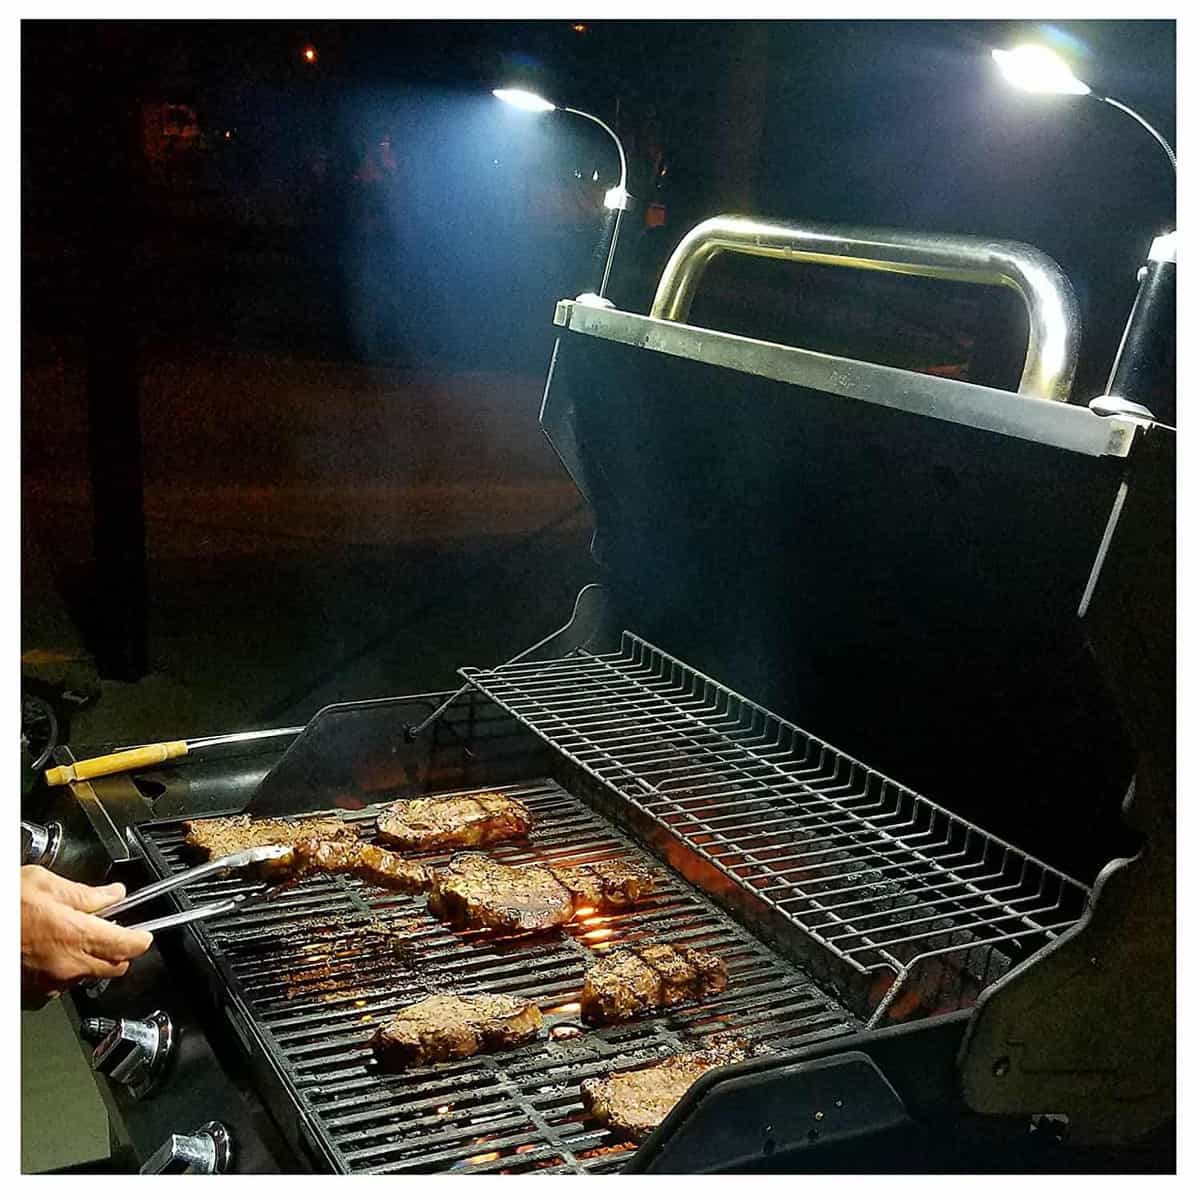 Magnetic Grill Lights | Grilling Hacks, Tools and Yummy Recipes